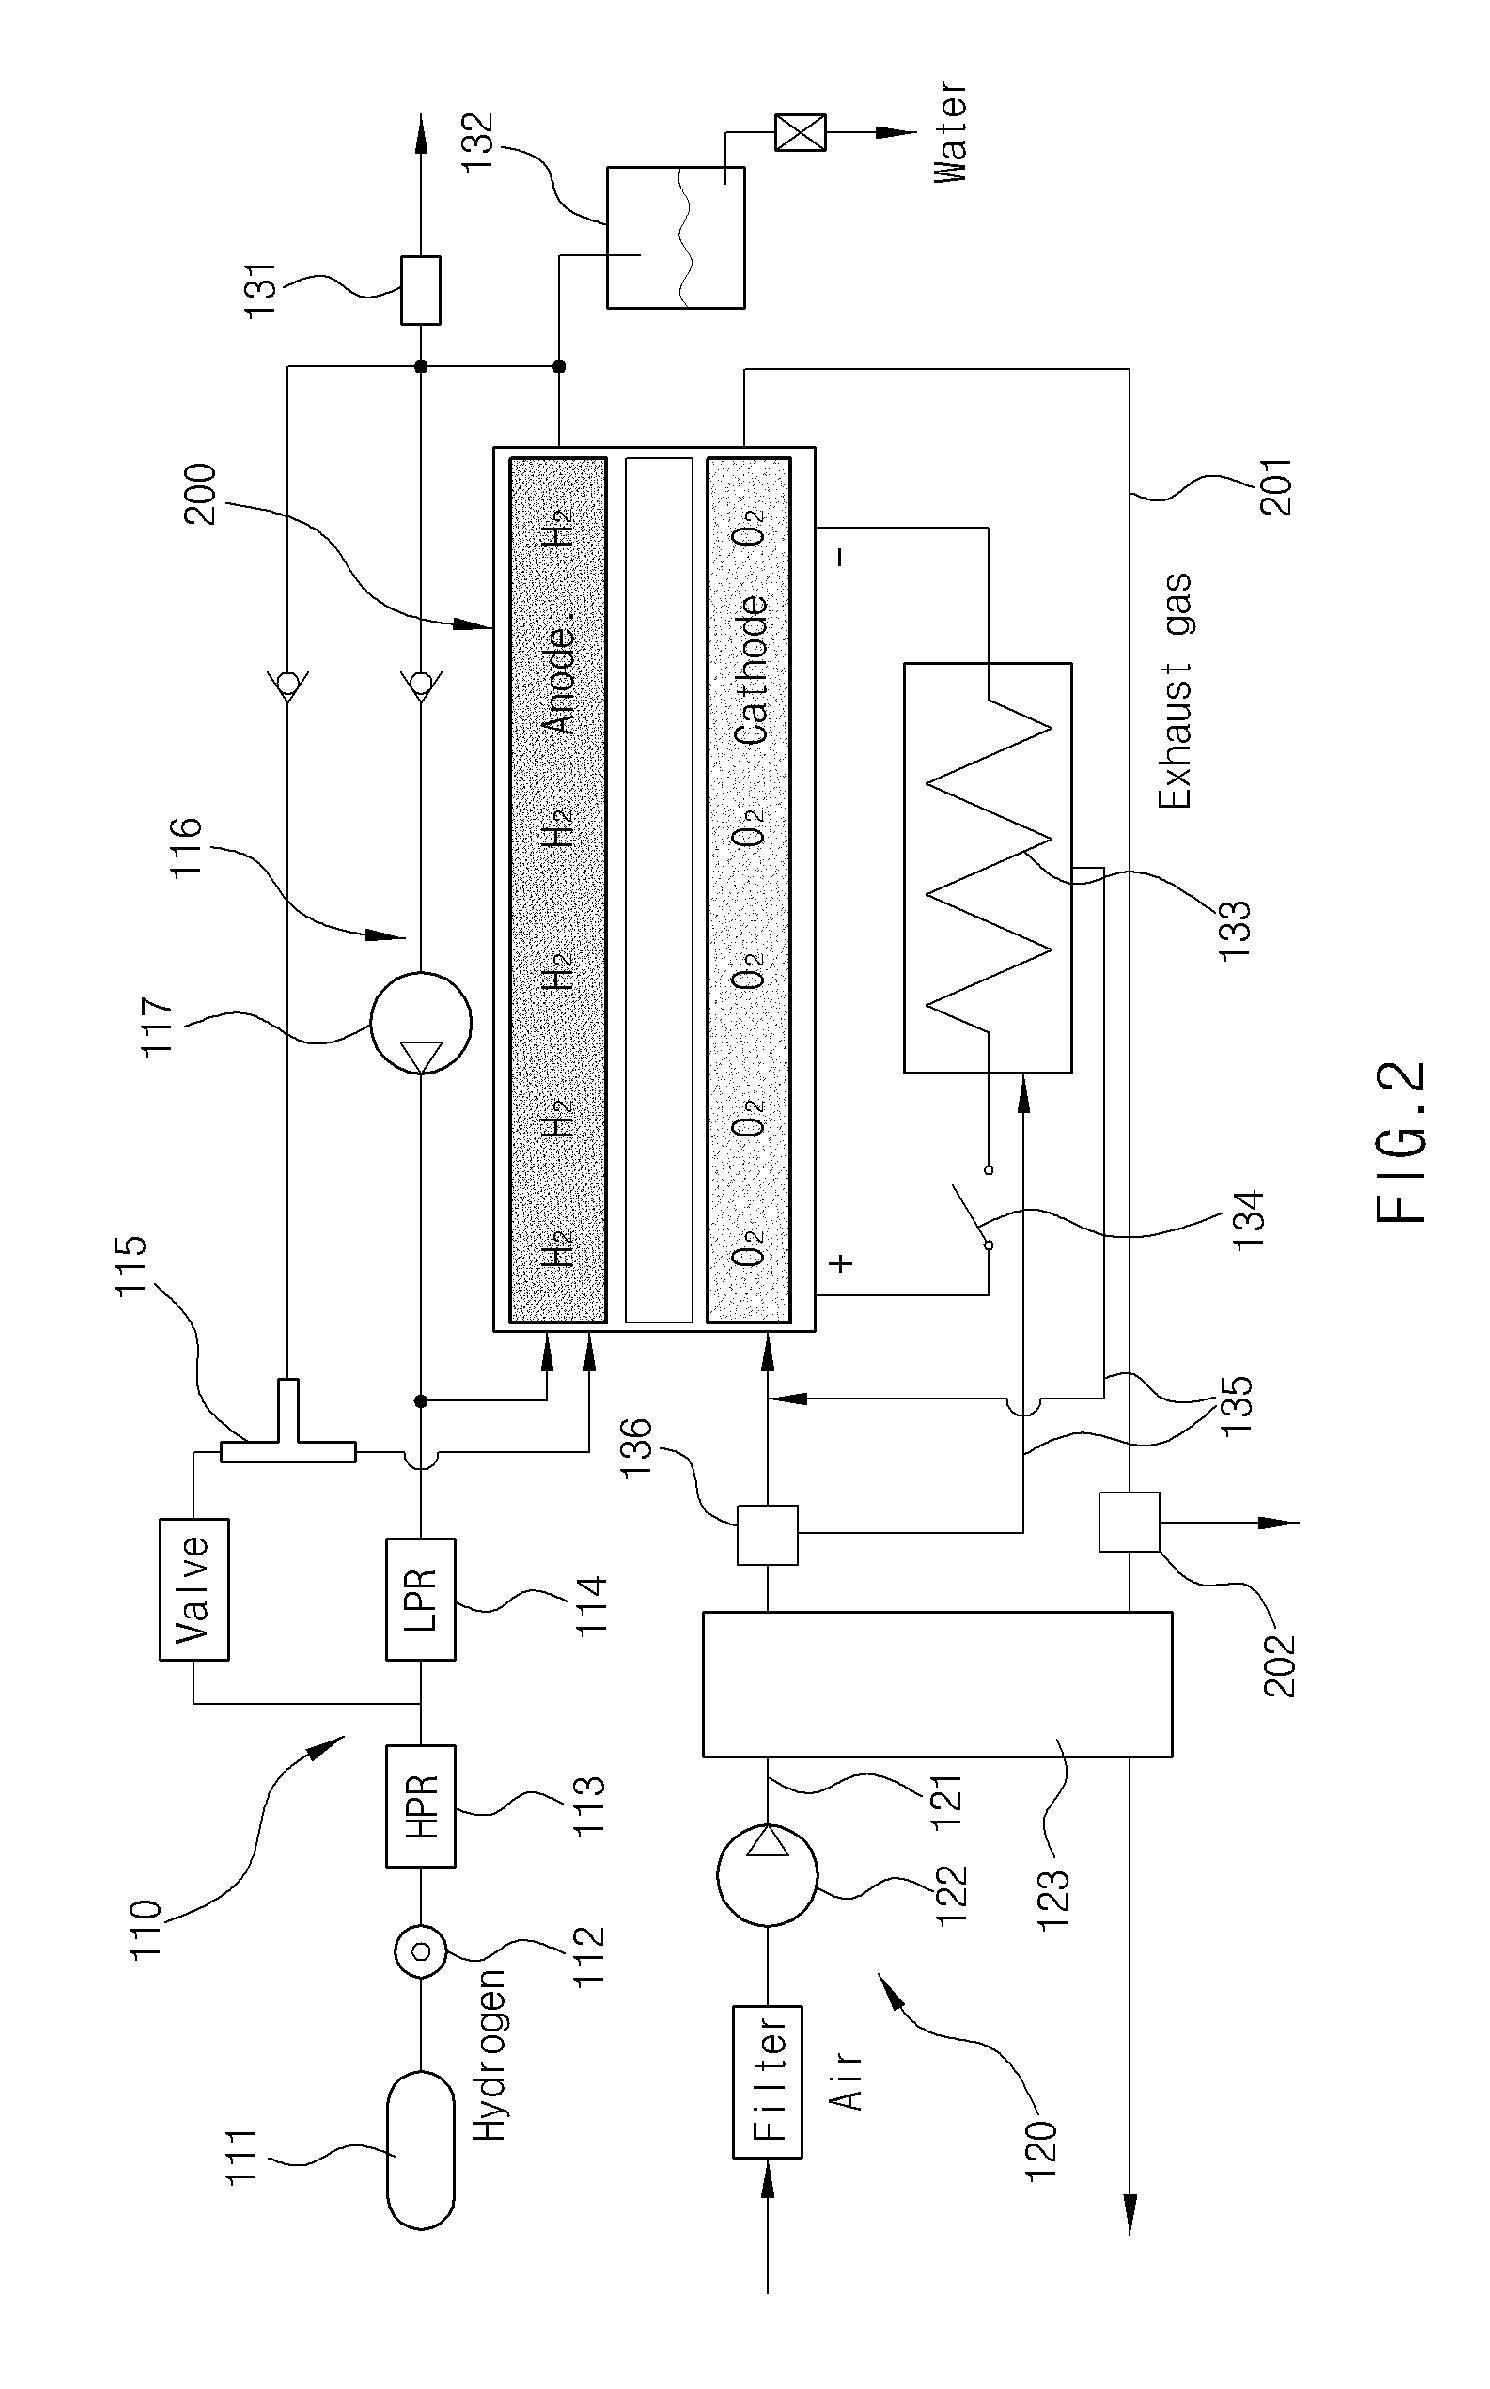 Method for shutting down fuel cell system